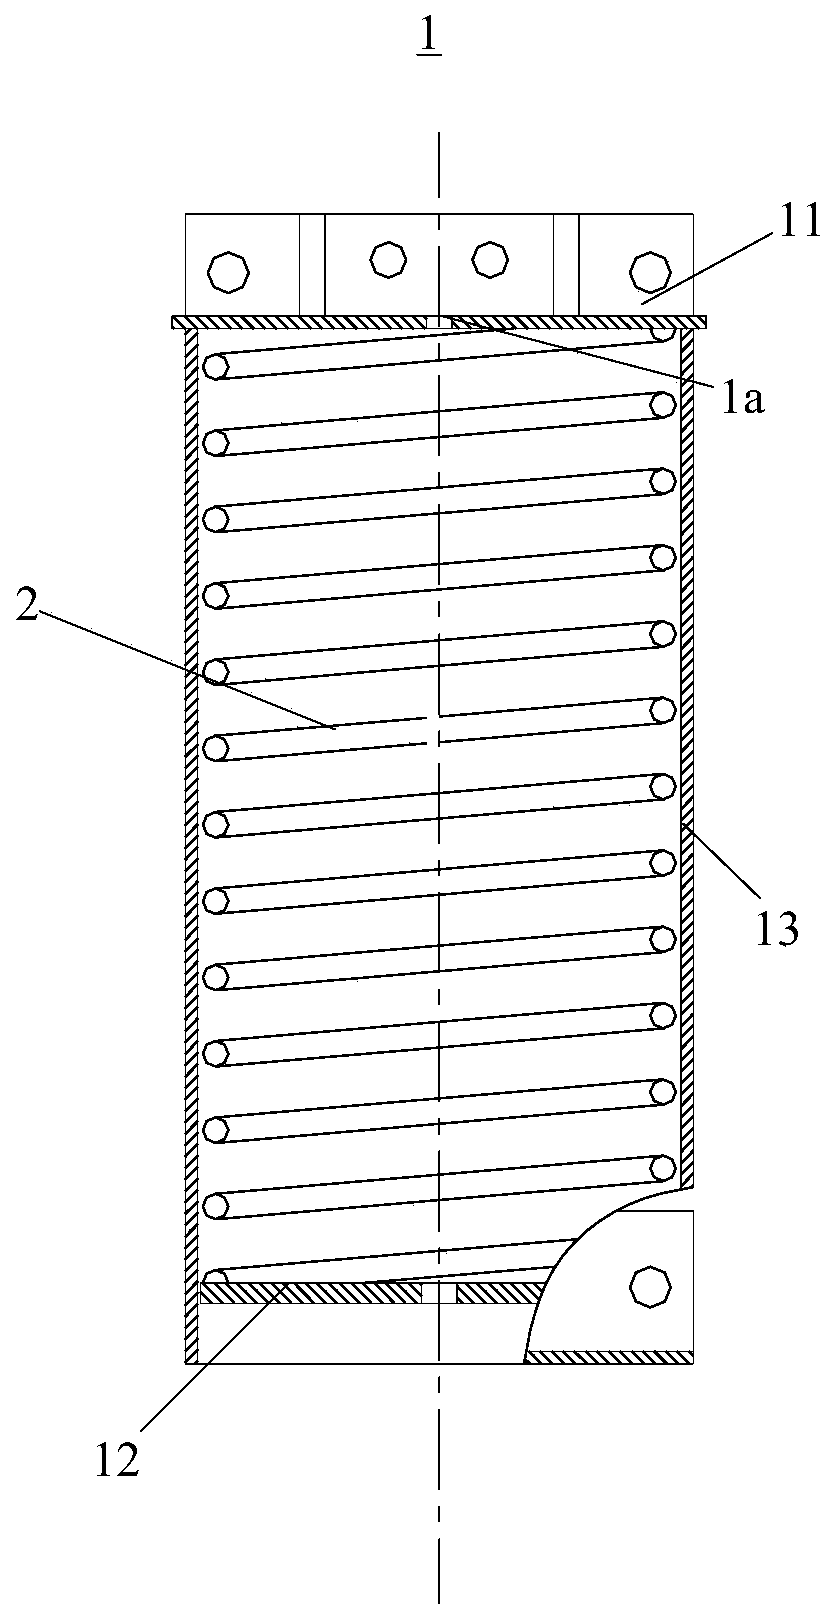 Photovoltaic tracking bracket and eccentric compensation device